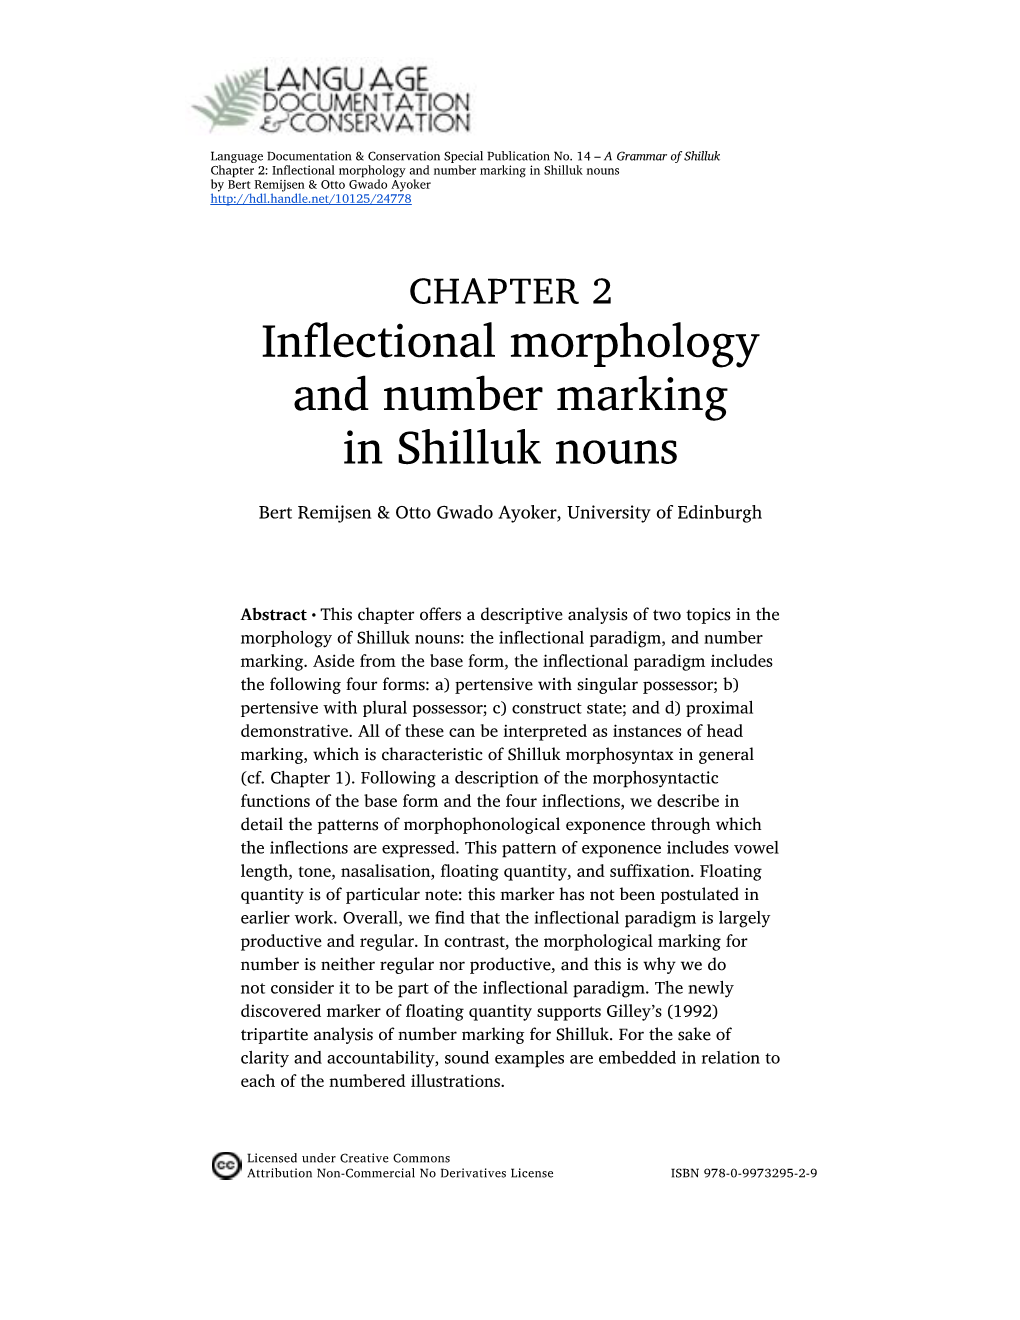 Chapter 2: Inflectional Morphology and Number Marking in Shilluk Nouns by Bert Remijsen & Otto Gwado Ayoker